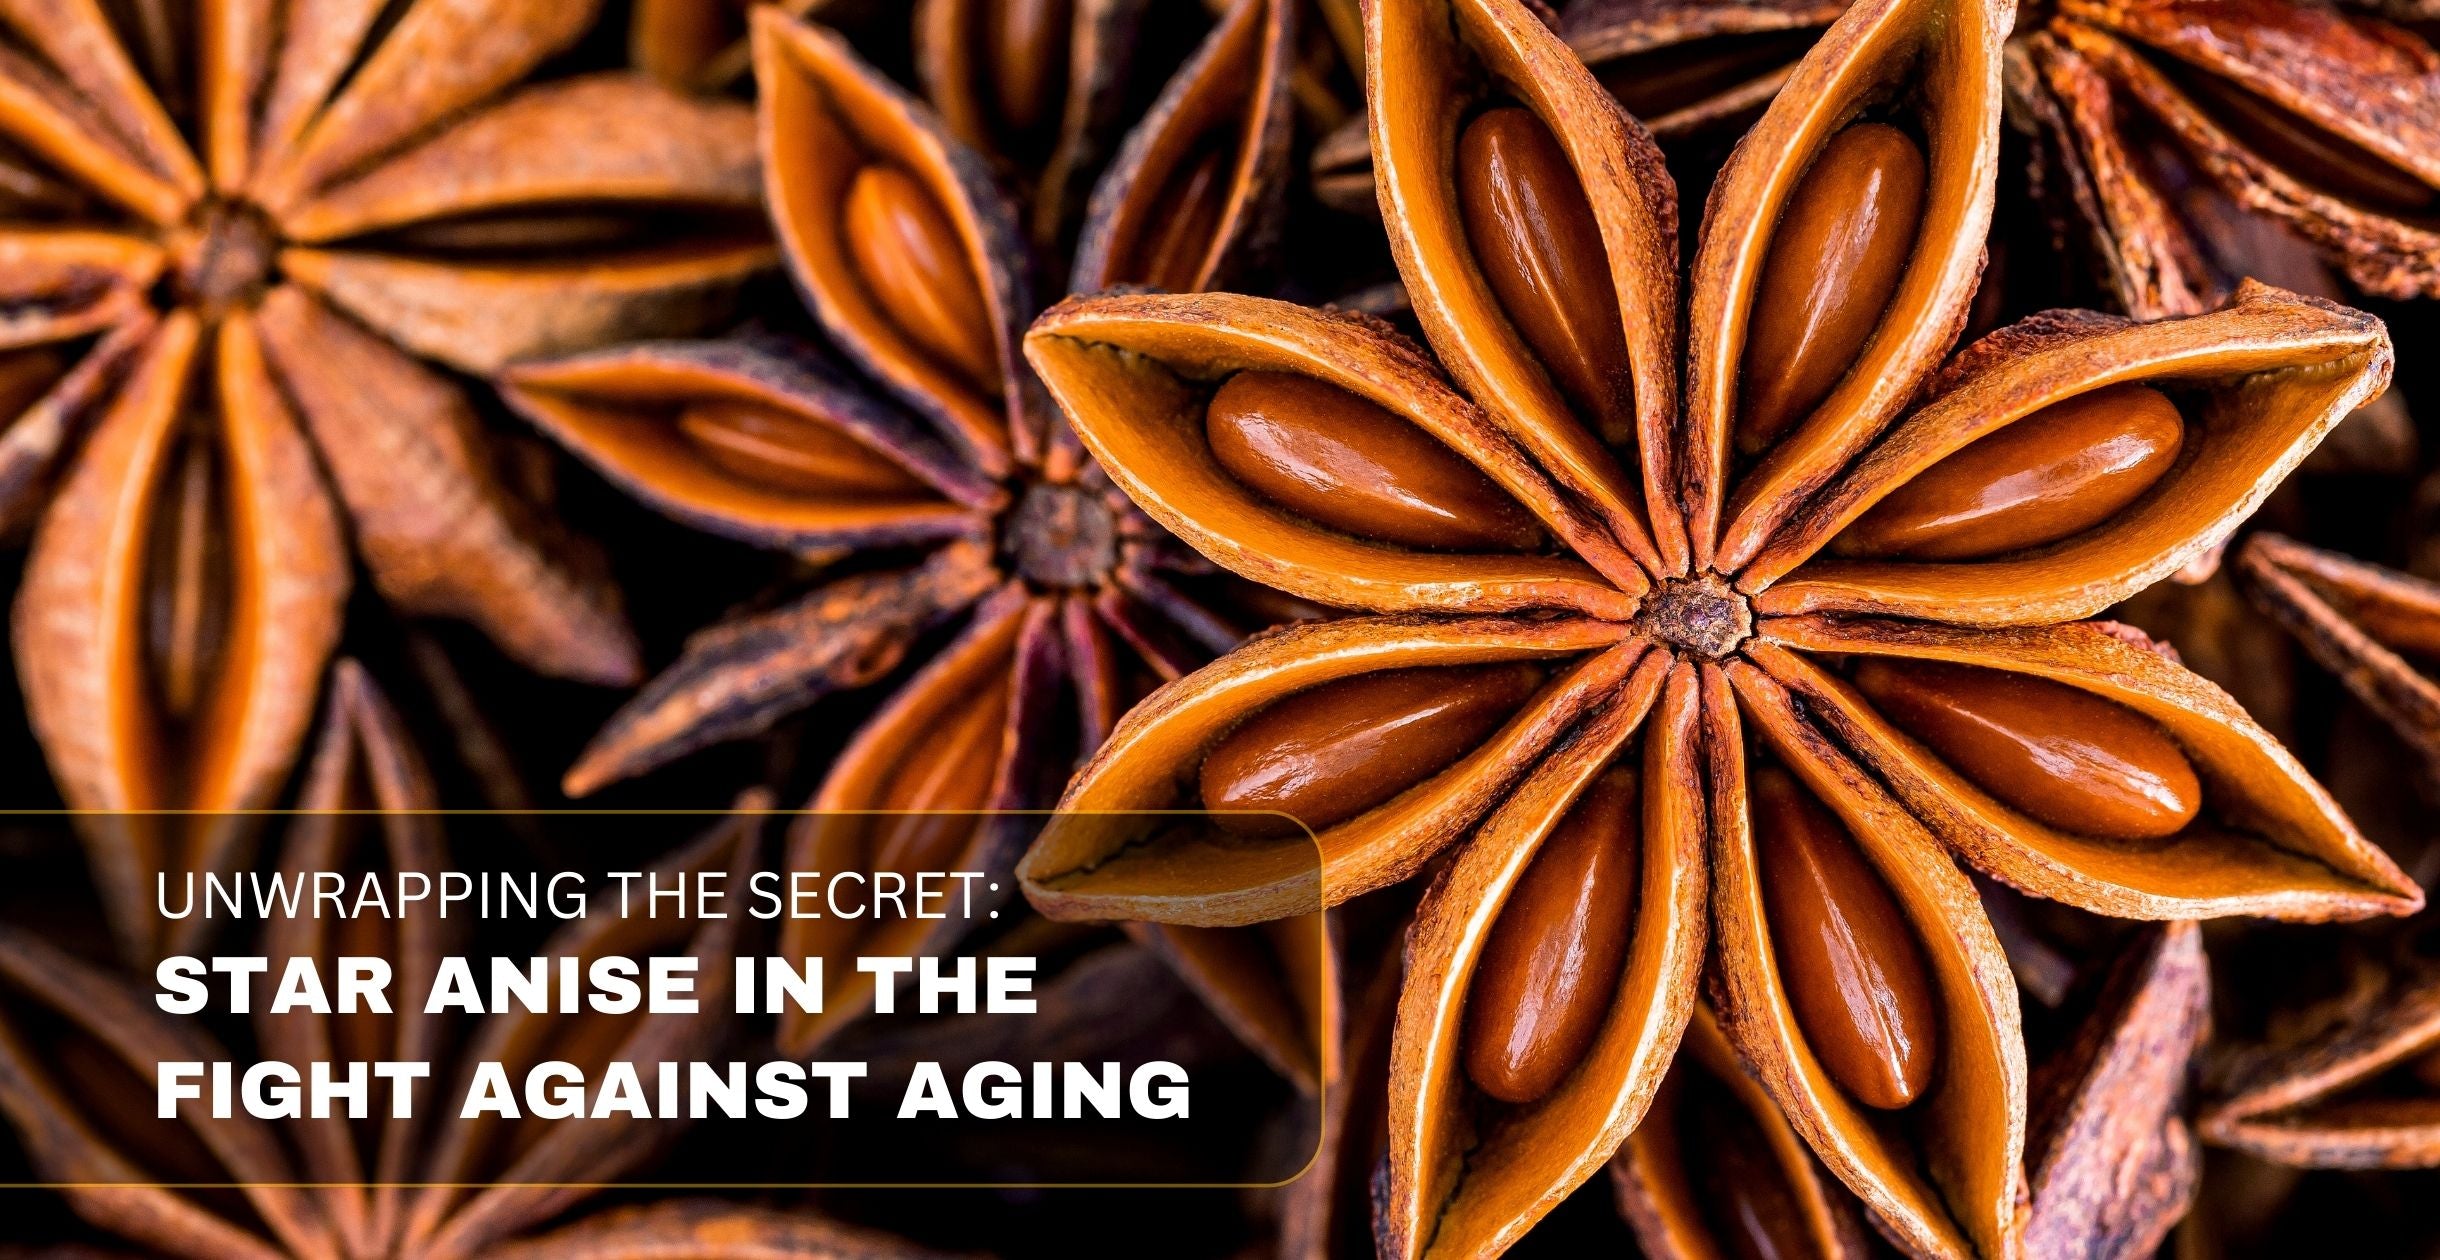 Unwrapping the Secret: Star Anise in the Fight Against Aging